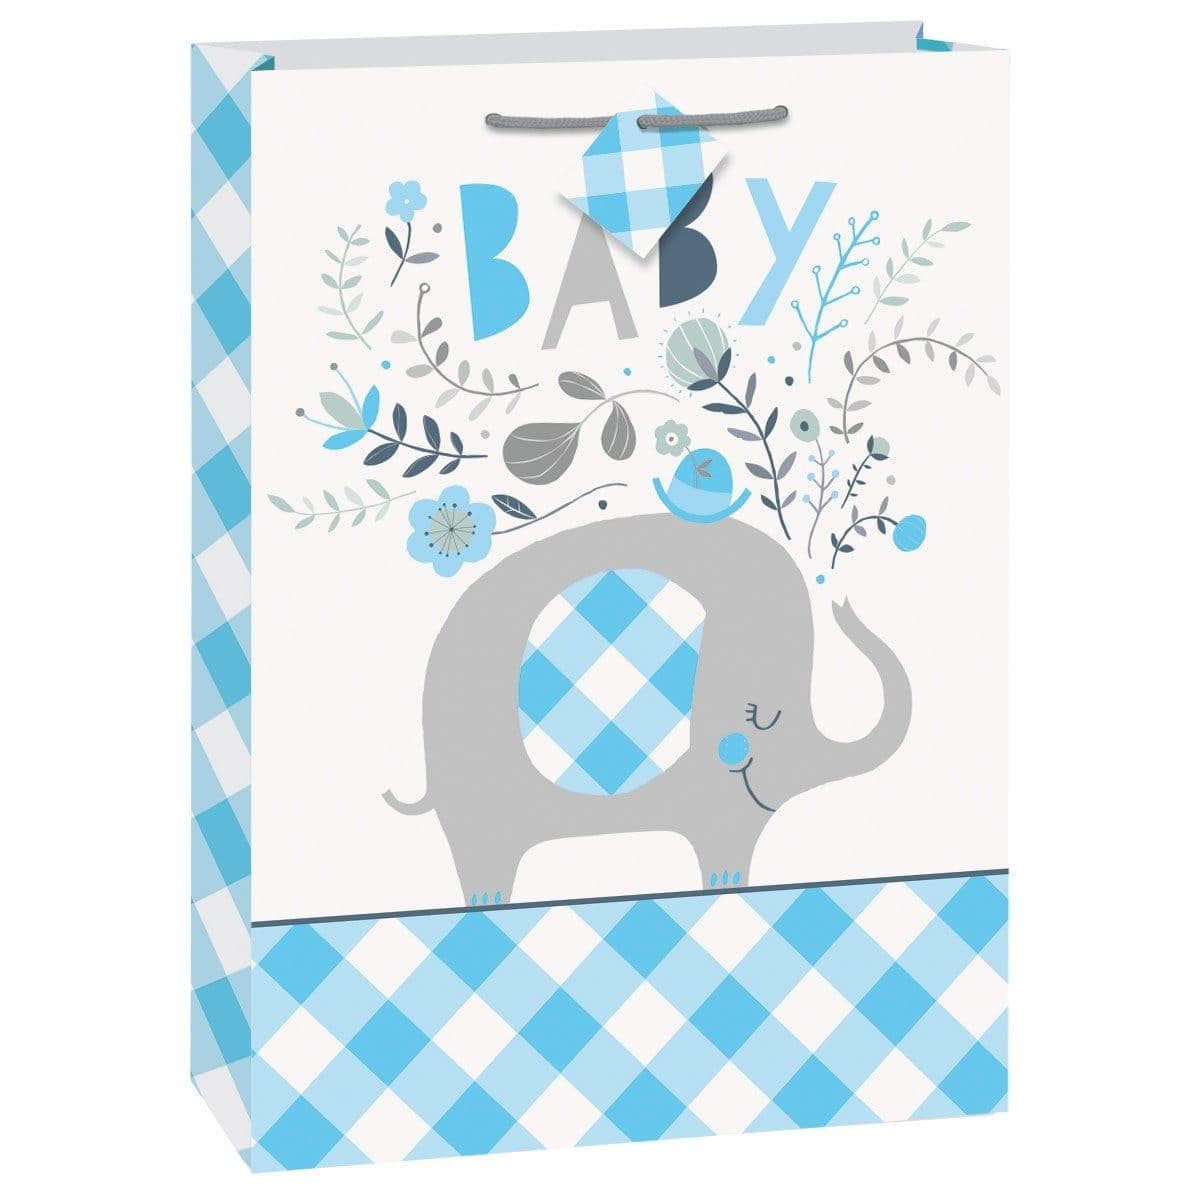 Buy Baby Shower Blue Floral Elephant Gift Bag Jumbo sold at Party Expert